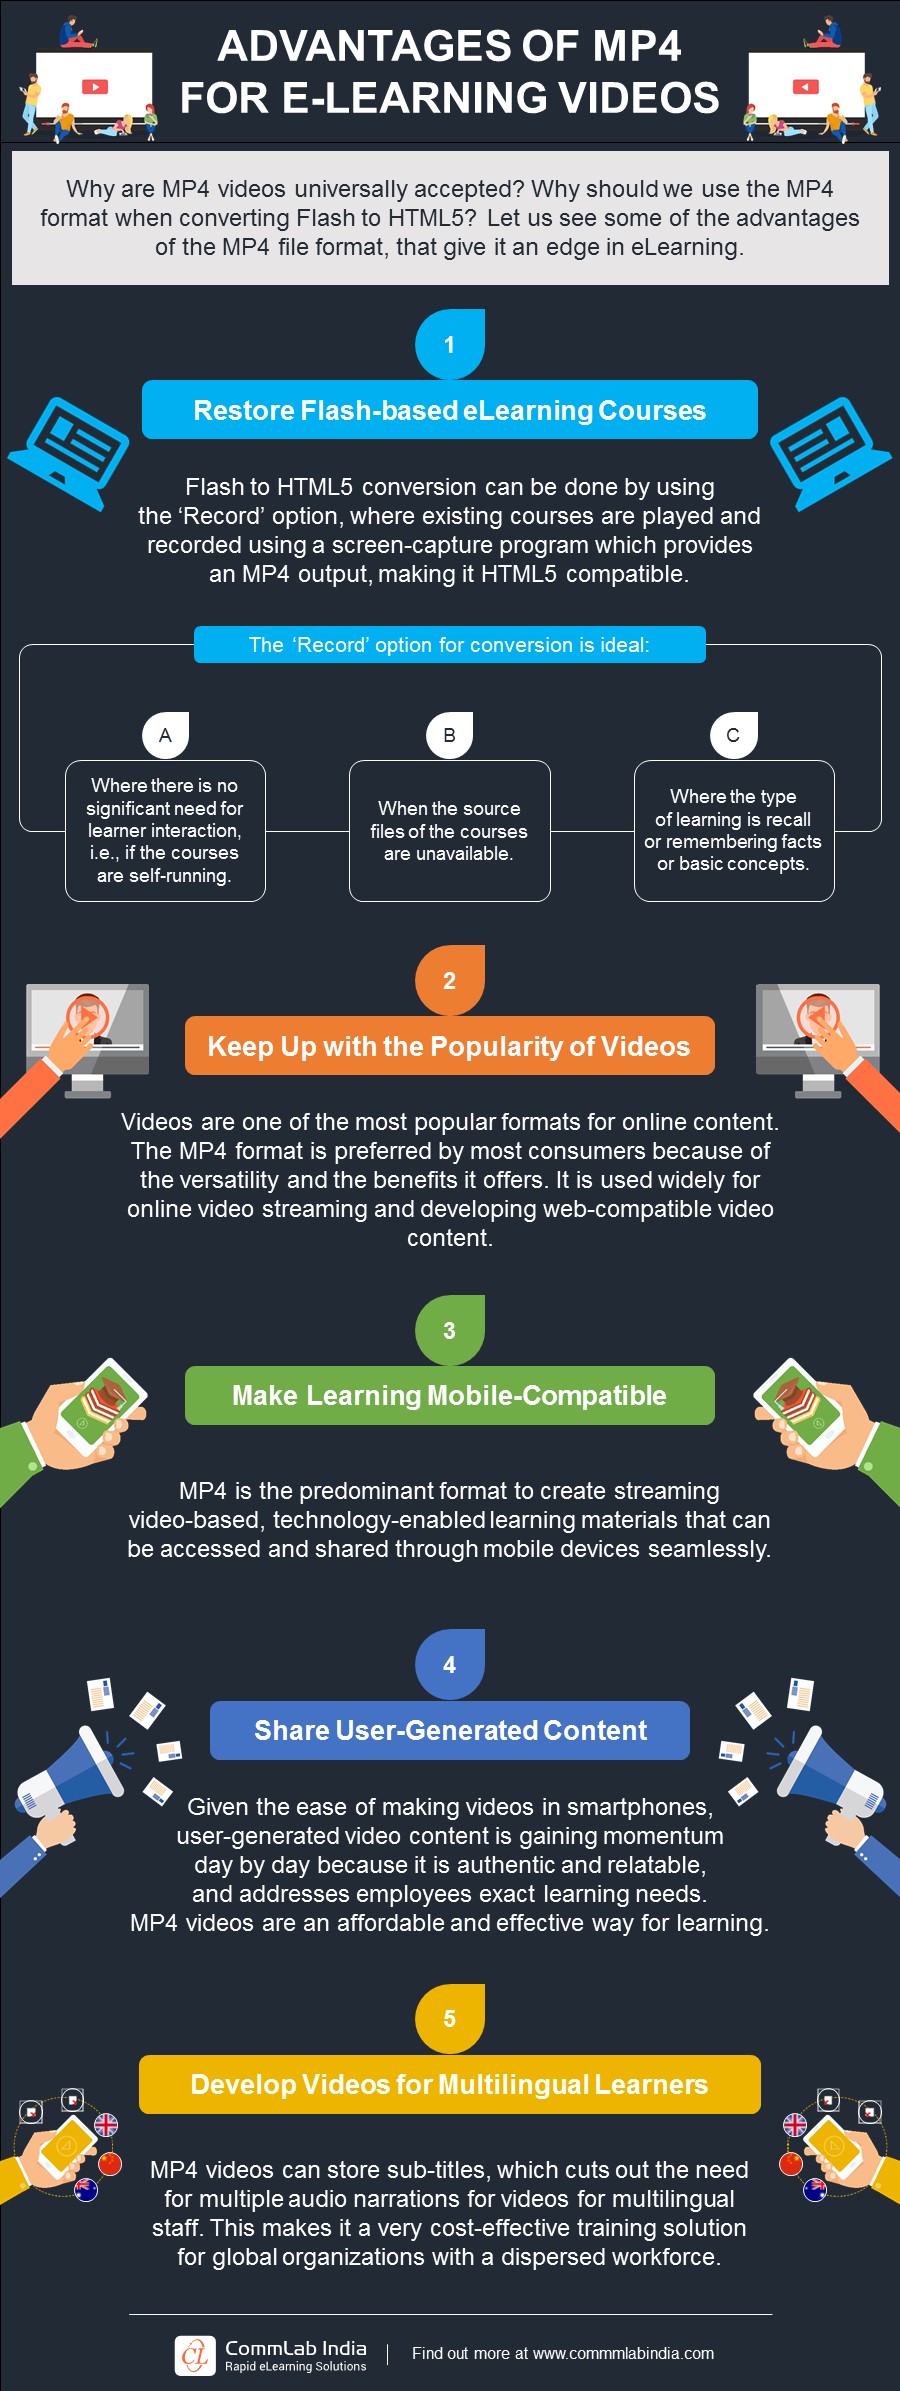 Advantages of MP4 for E-learning Videos [Infographic]